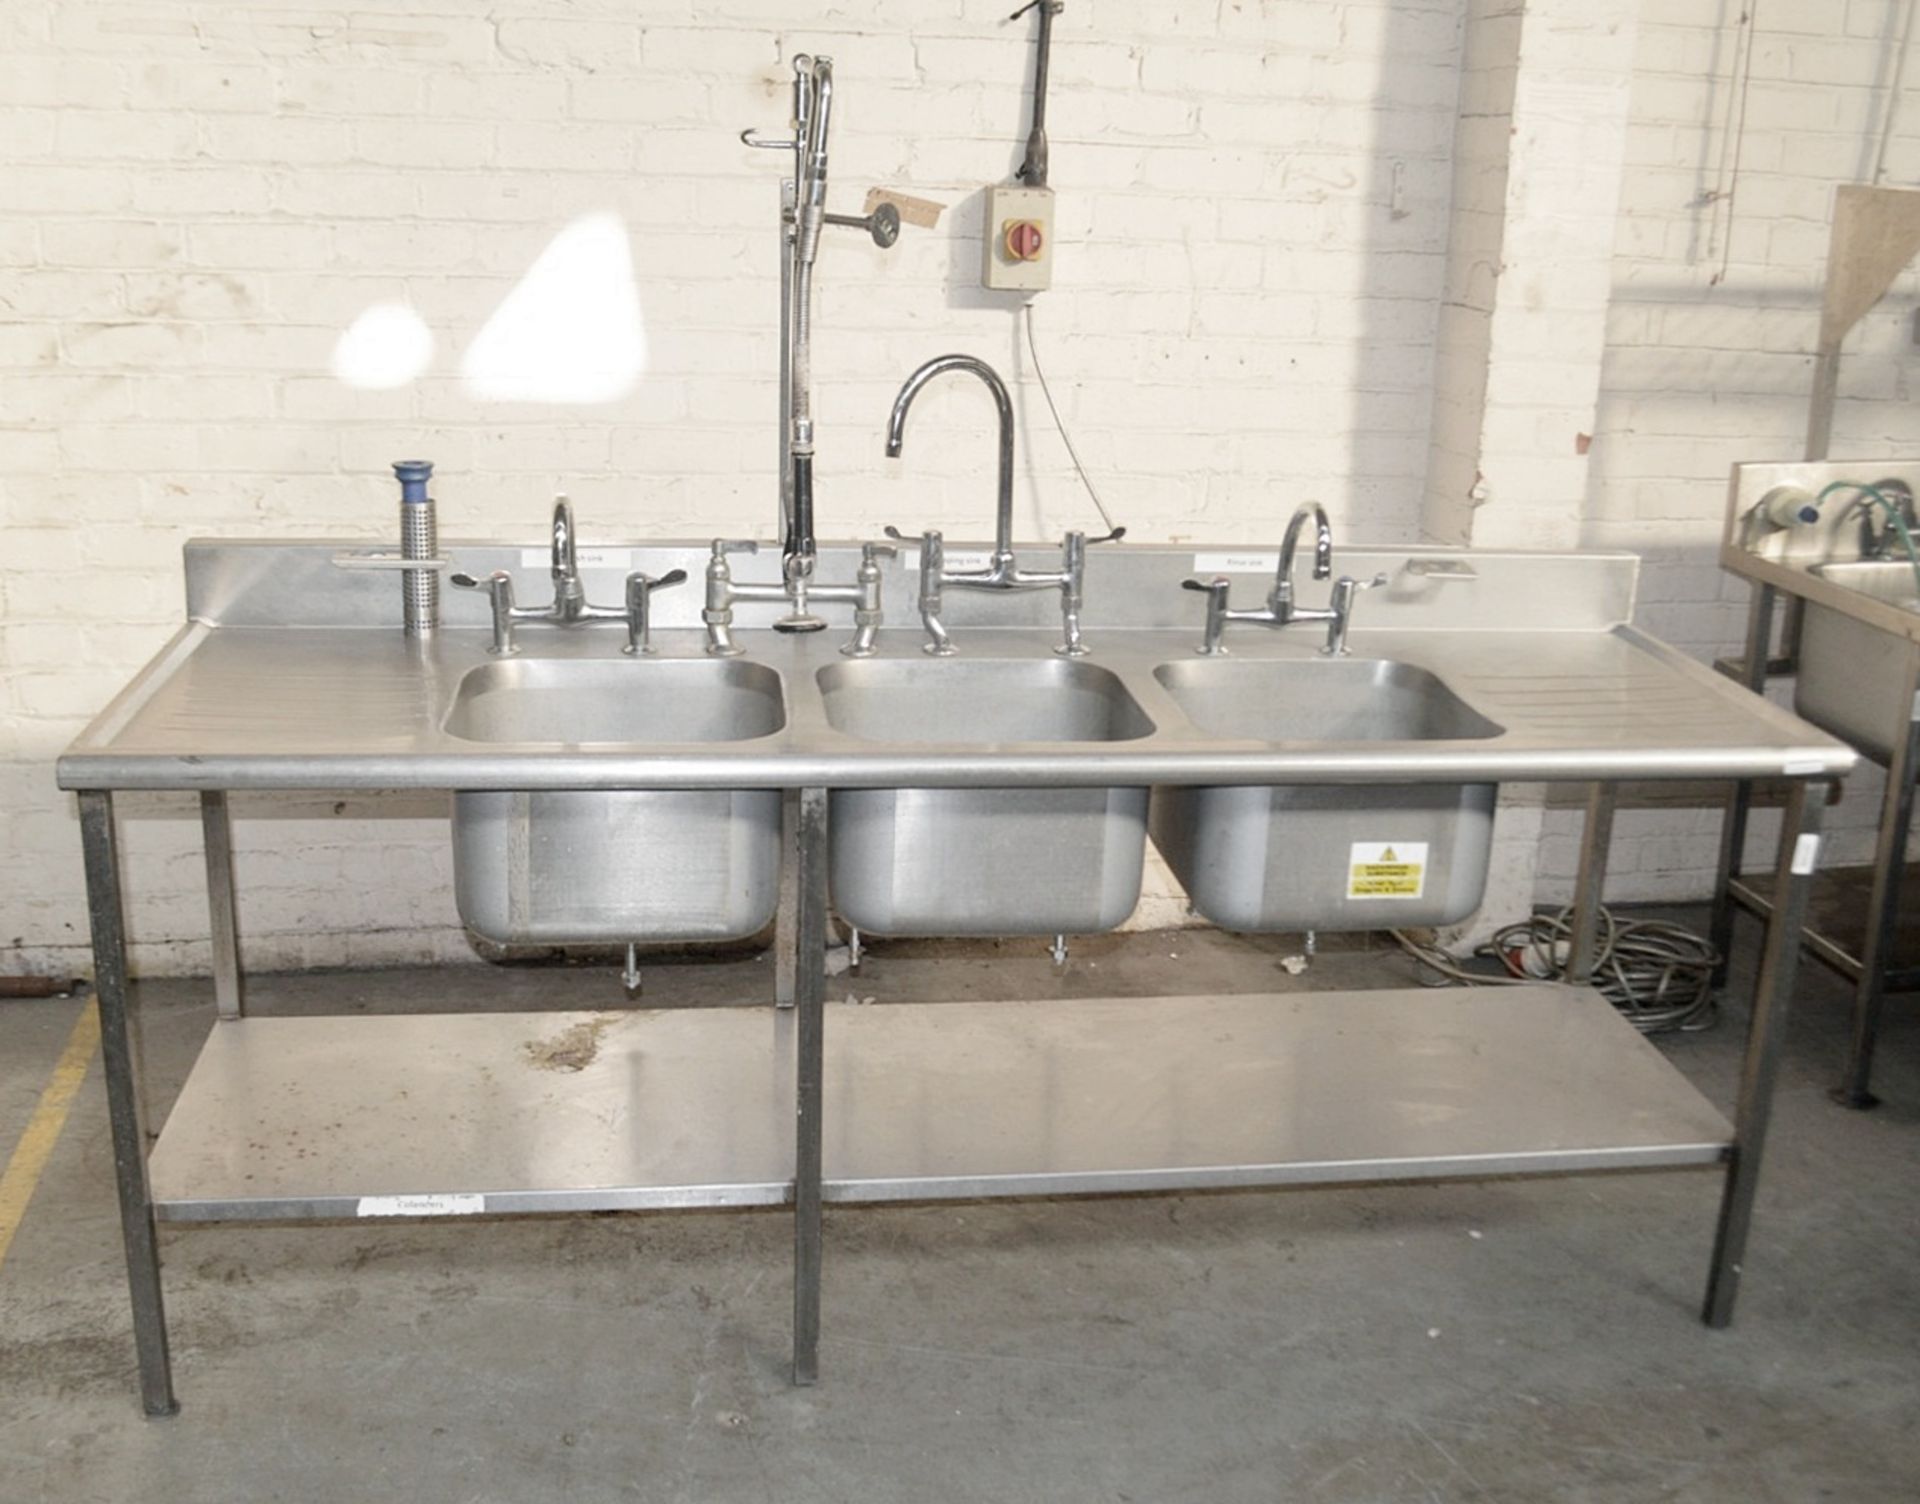 1 x Stainless Steel Commercial Kitchen Triple Pot Wash Sink Unit With Spray Arm - Dimensions: H97 - Image 5 of 9